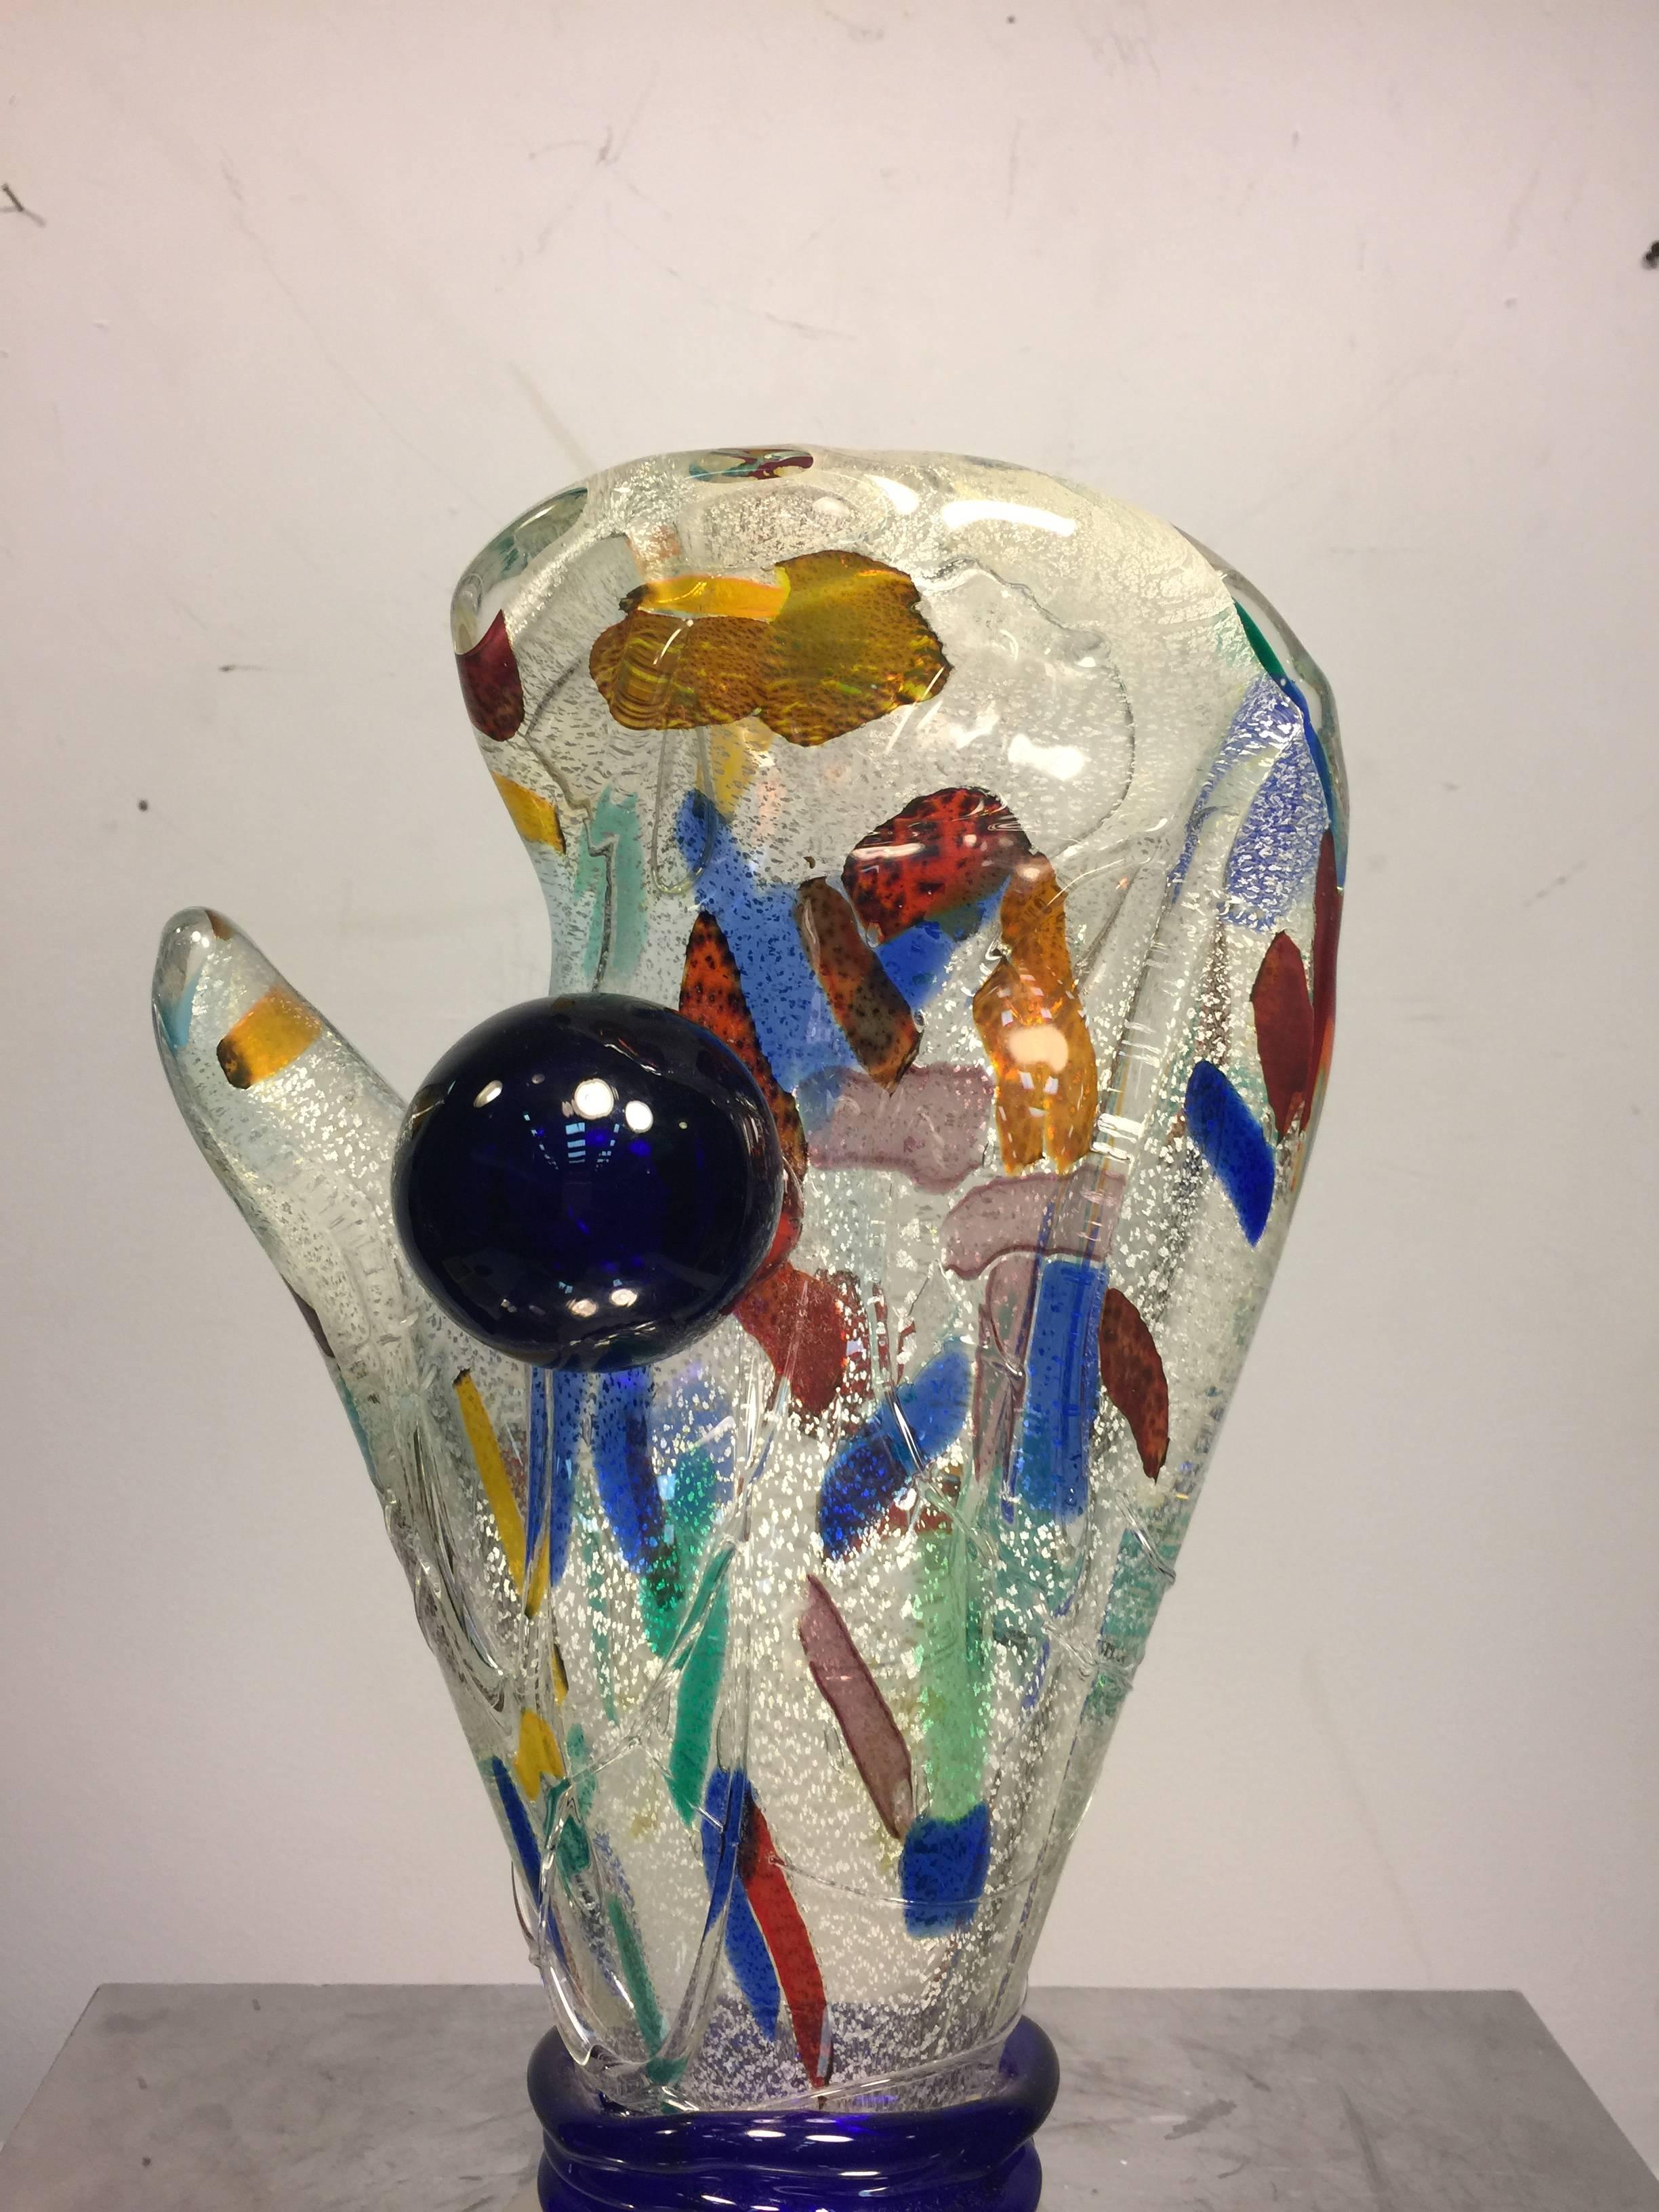 A magnificent, Modernist, Murano Glass, catcher's mitt and ball with fantastic colors, circa 1970. Great gift for any sports, or baseball enthusiast. Retains its original, 